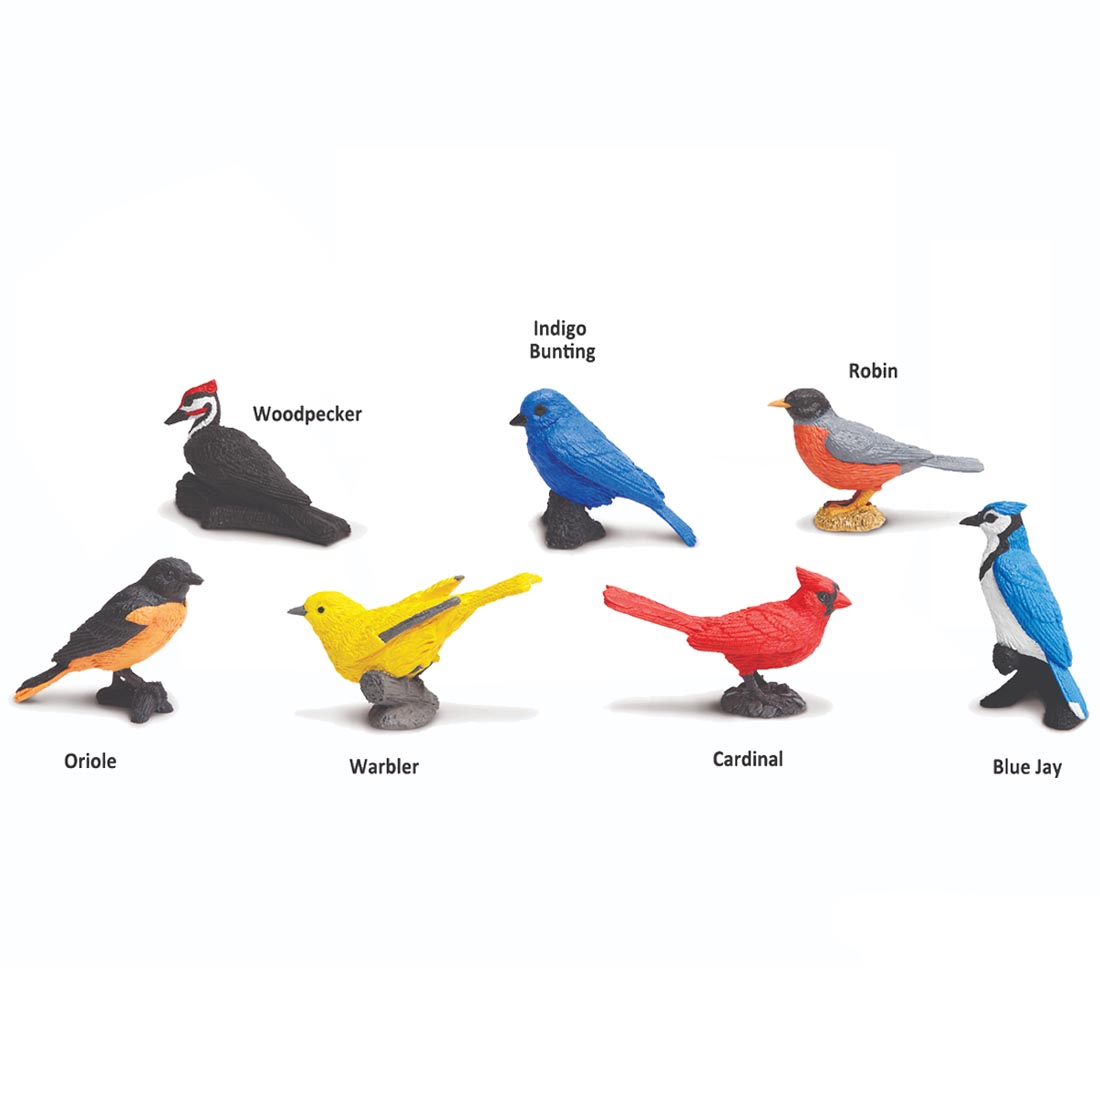 7 creatures from the Backyard Birds Figurine Set labeled with their names: Woodpecker, Indigo Bunting, Robin, Oriole, Warbler, Cardinal and Blue Jay